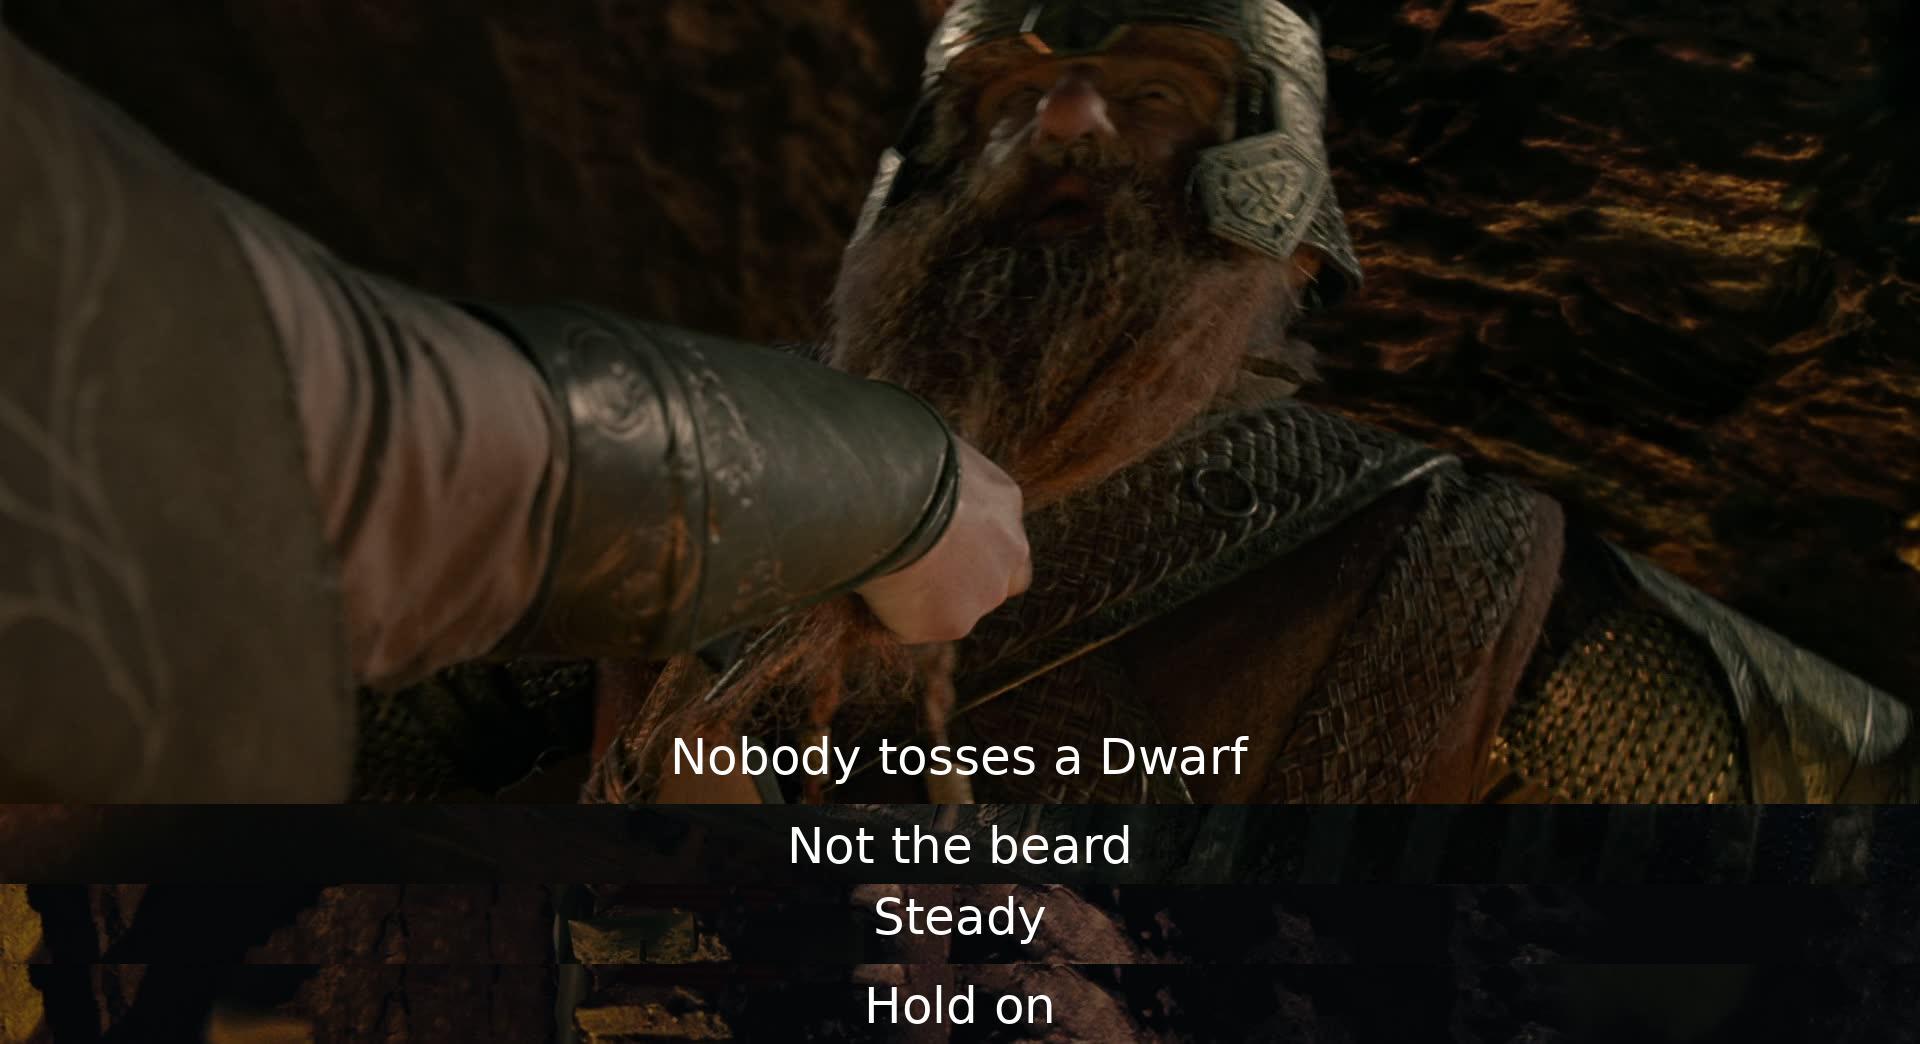 A group of characters are arguing, emphasizing the importance of not mistreating a dwarf. Amidst the tension, someone mentions a beard, urging for caution and stability in the situation.